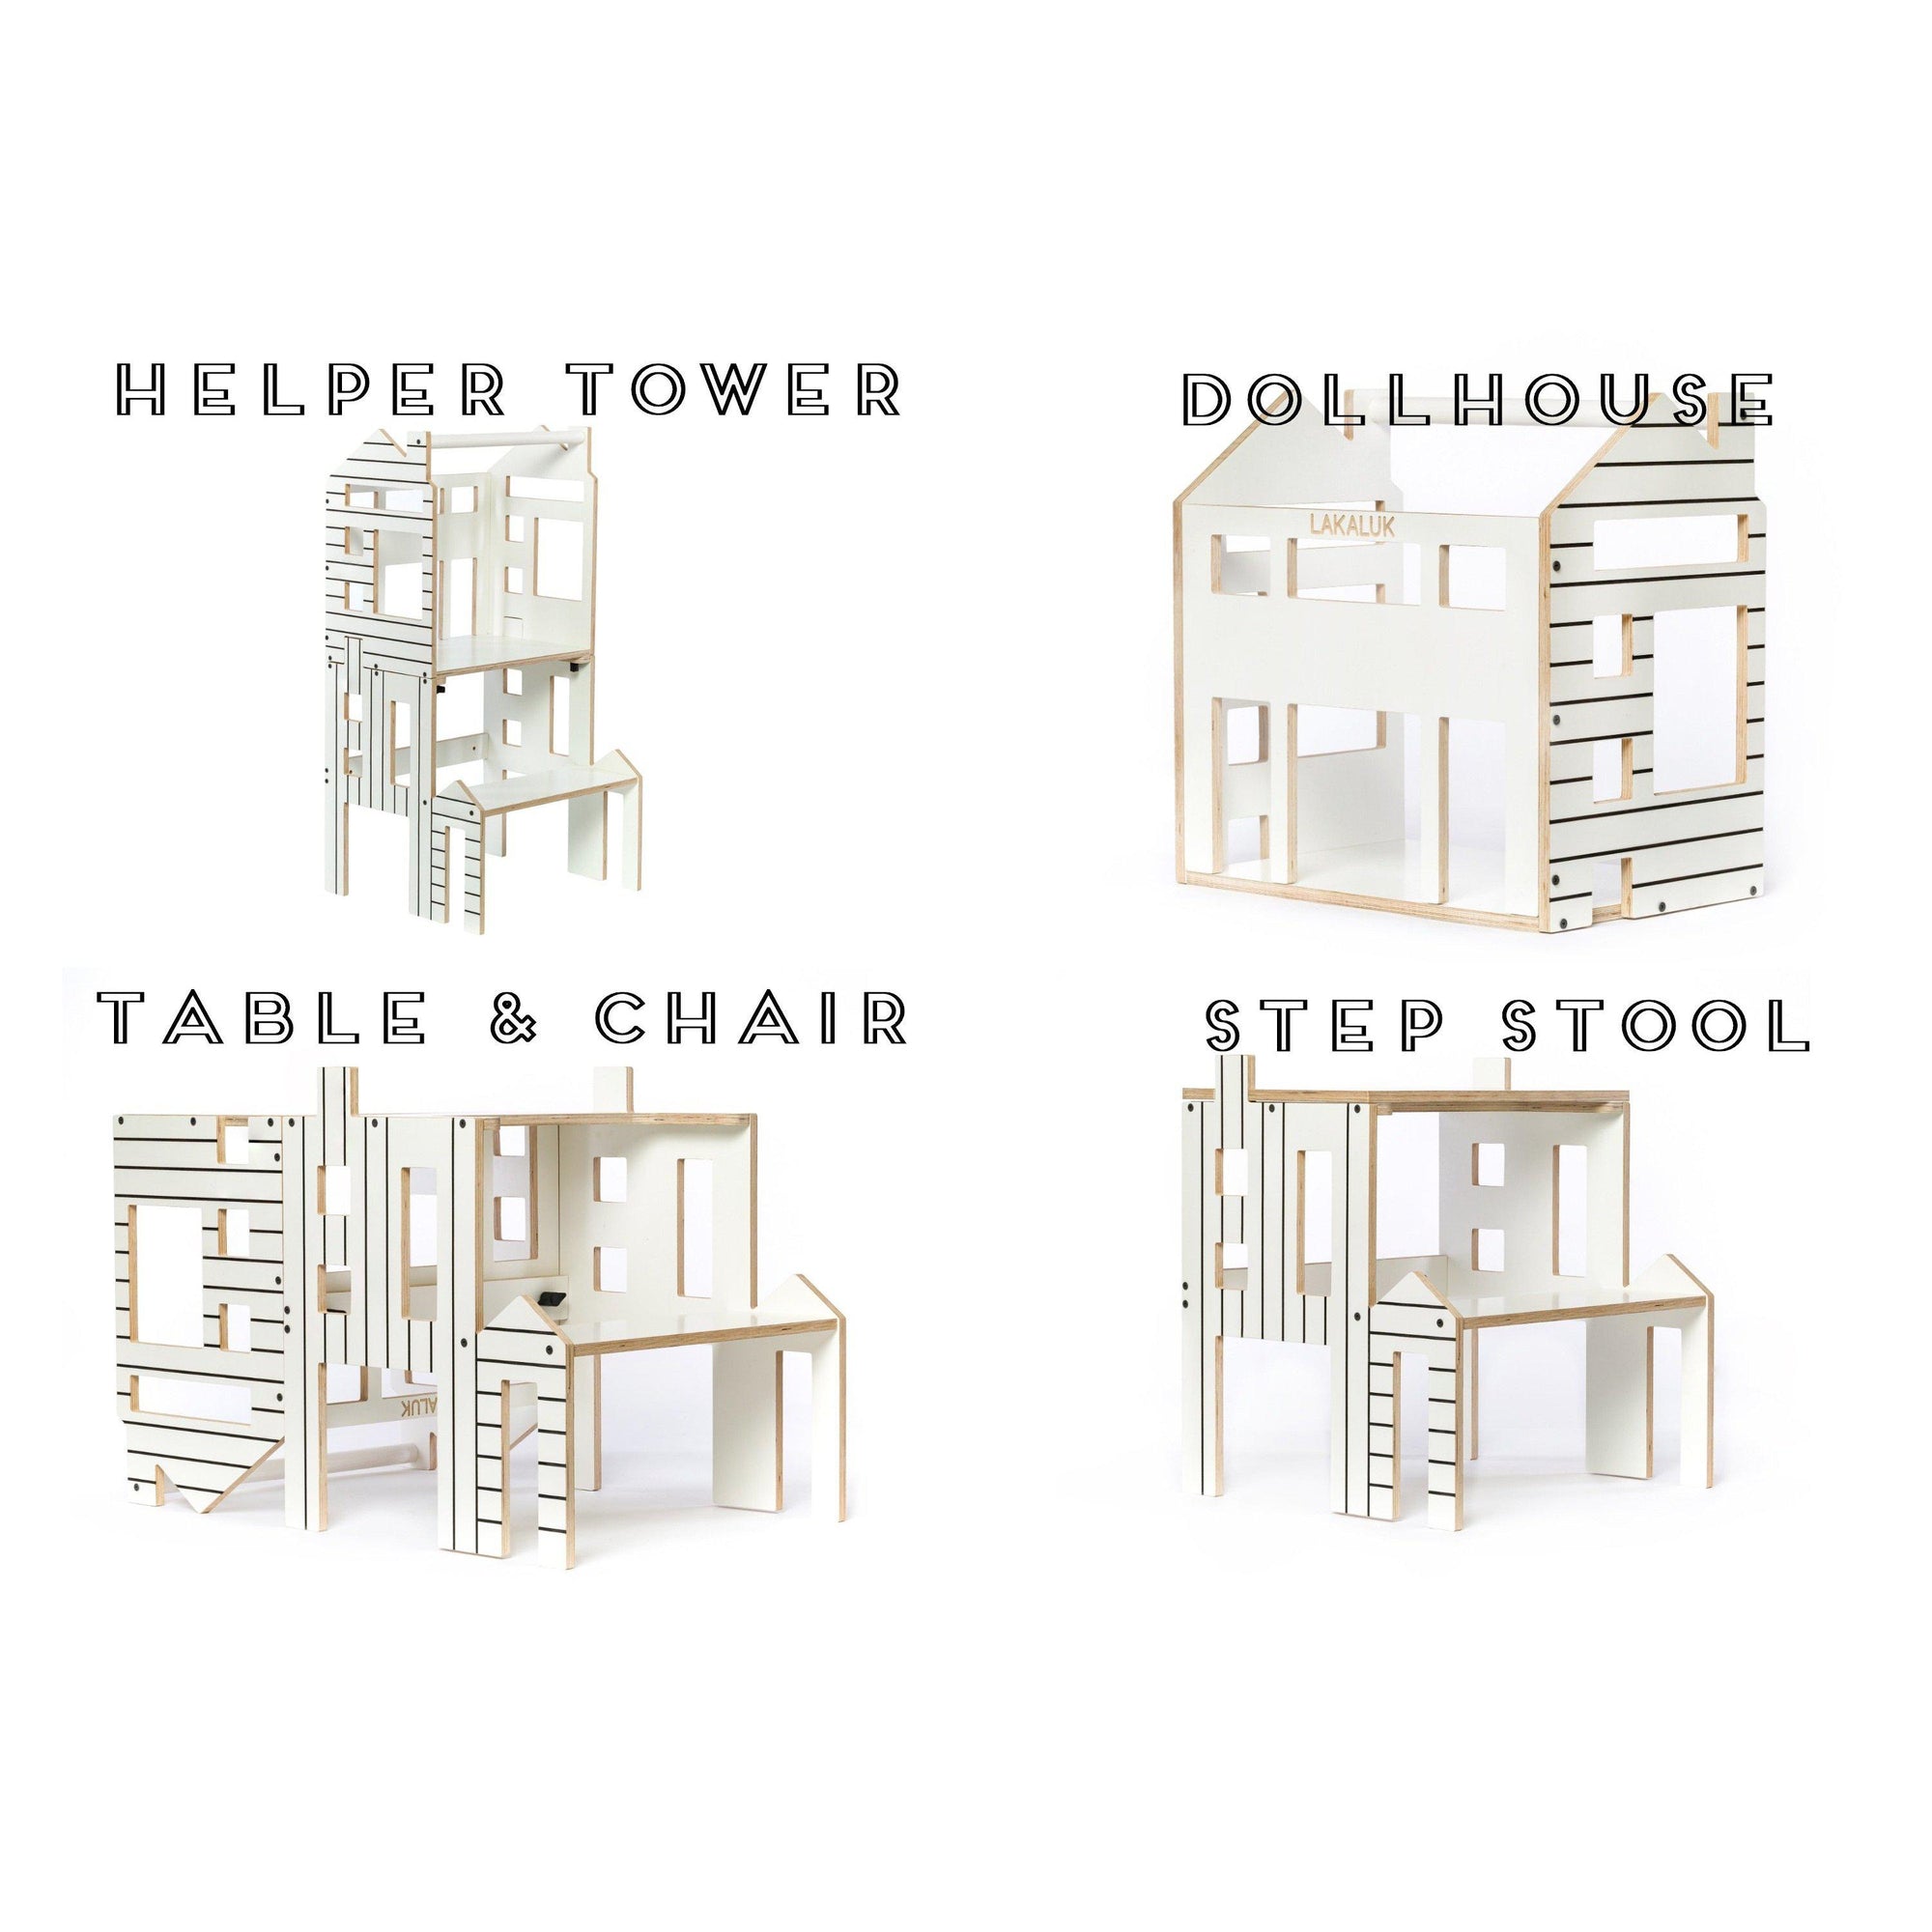 Rugs by Roo | Lakaluk Wooden Multi-Function Learning Tower Dollhouse-1121